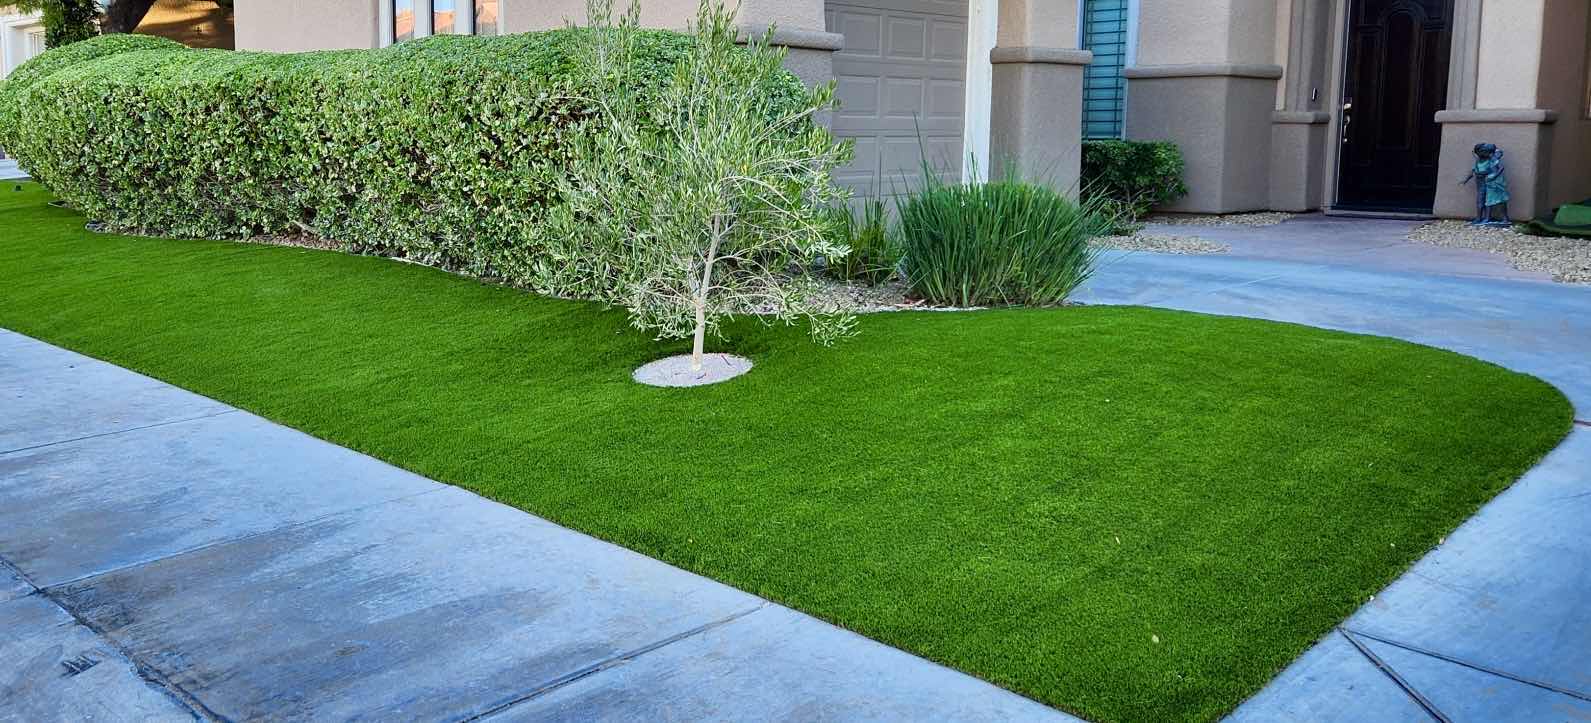 Photo 1 of PREMIUM HIGH-END ARTIFICIAL GRASS TURF 15’ x 100’ (1500 TOTAL SQ FT) ANTHEM COUNTRY CLUB APPROVED - TOTAL HEIGHT 1.97”